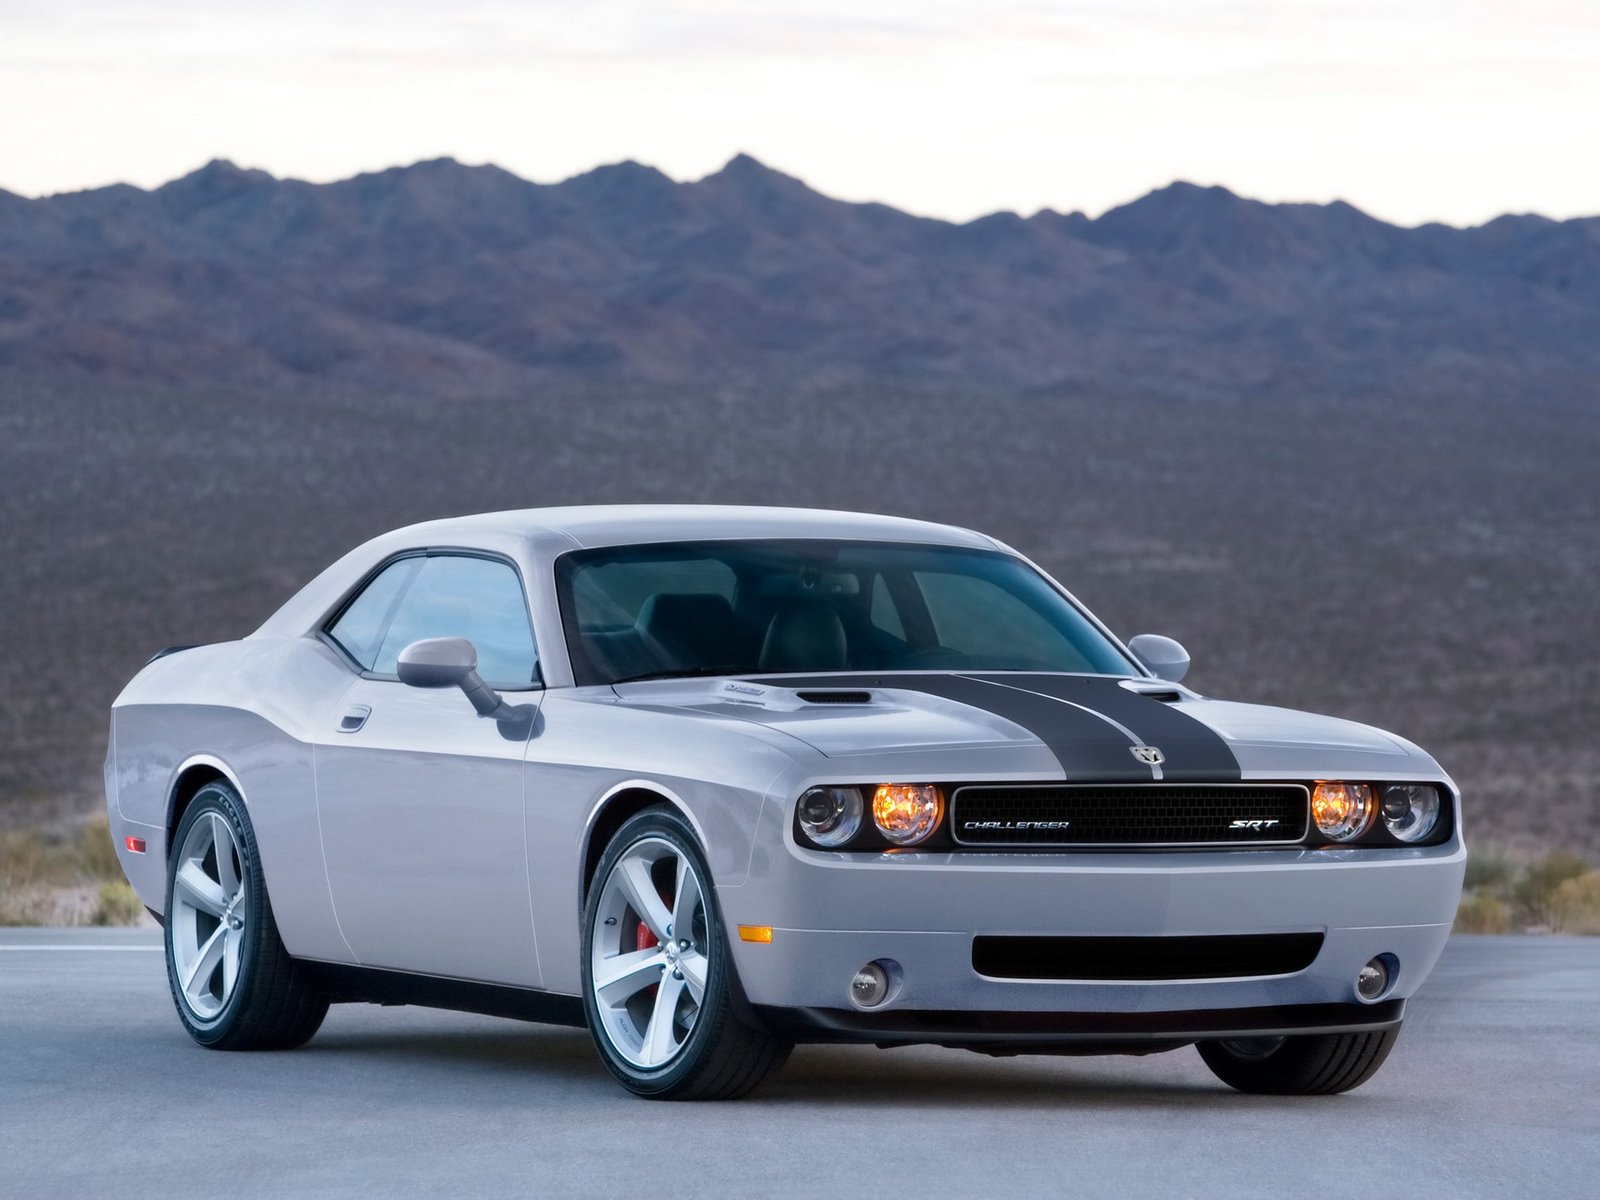 Dodge Challenger Wallpapers. Posted by jamur at 3:34 AM